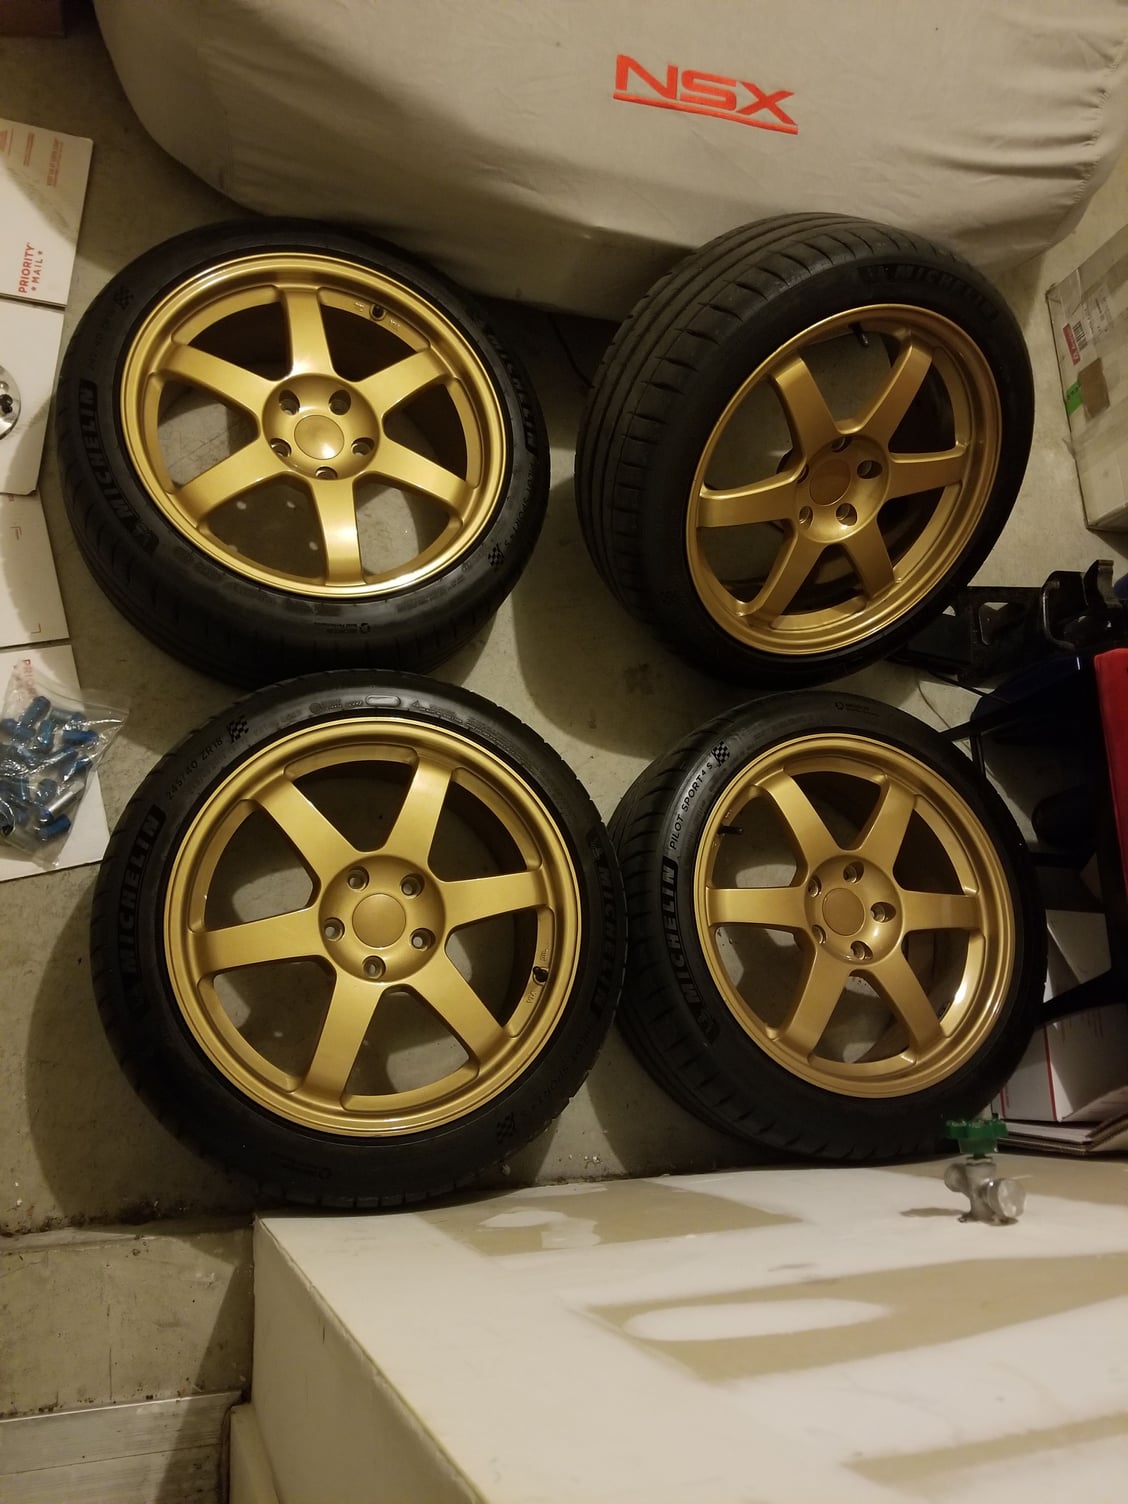 Wheels and Tires/Axles - FS: (OG) VOLK TE37 18x8.5 +50 Wheels - Used - 2007 to 2008 Acura TL - 1995 to 2006 Acura Legend - 2006 to 2008 Acura TSX - Jersey City, NJ 07305, United States